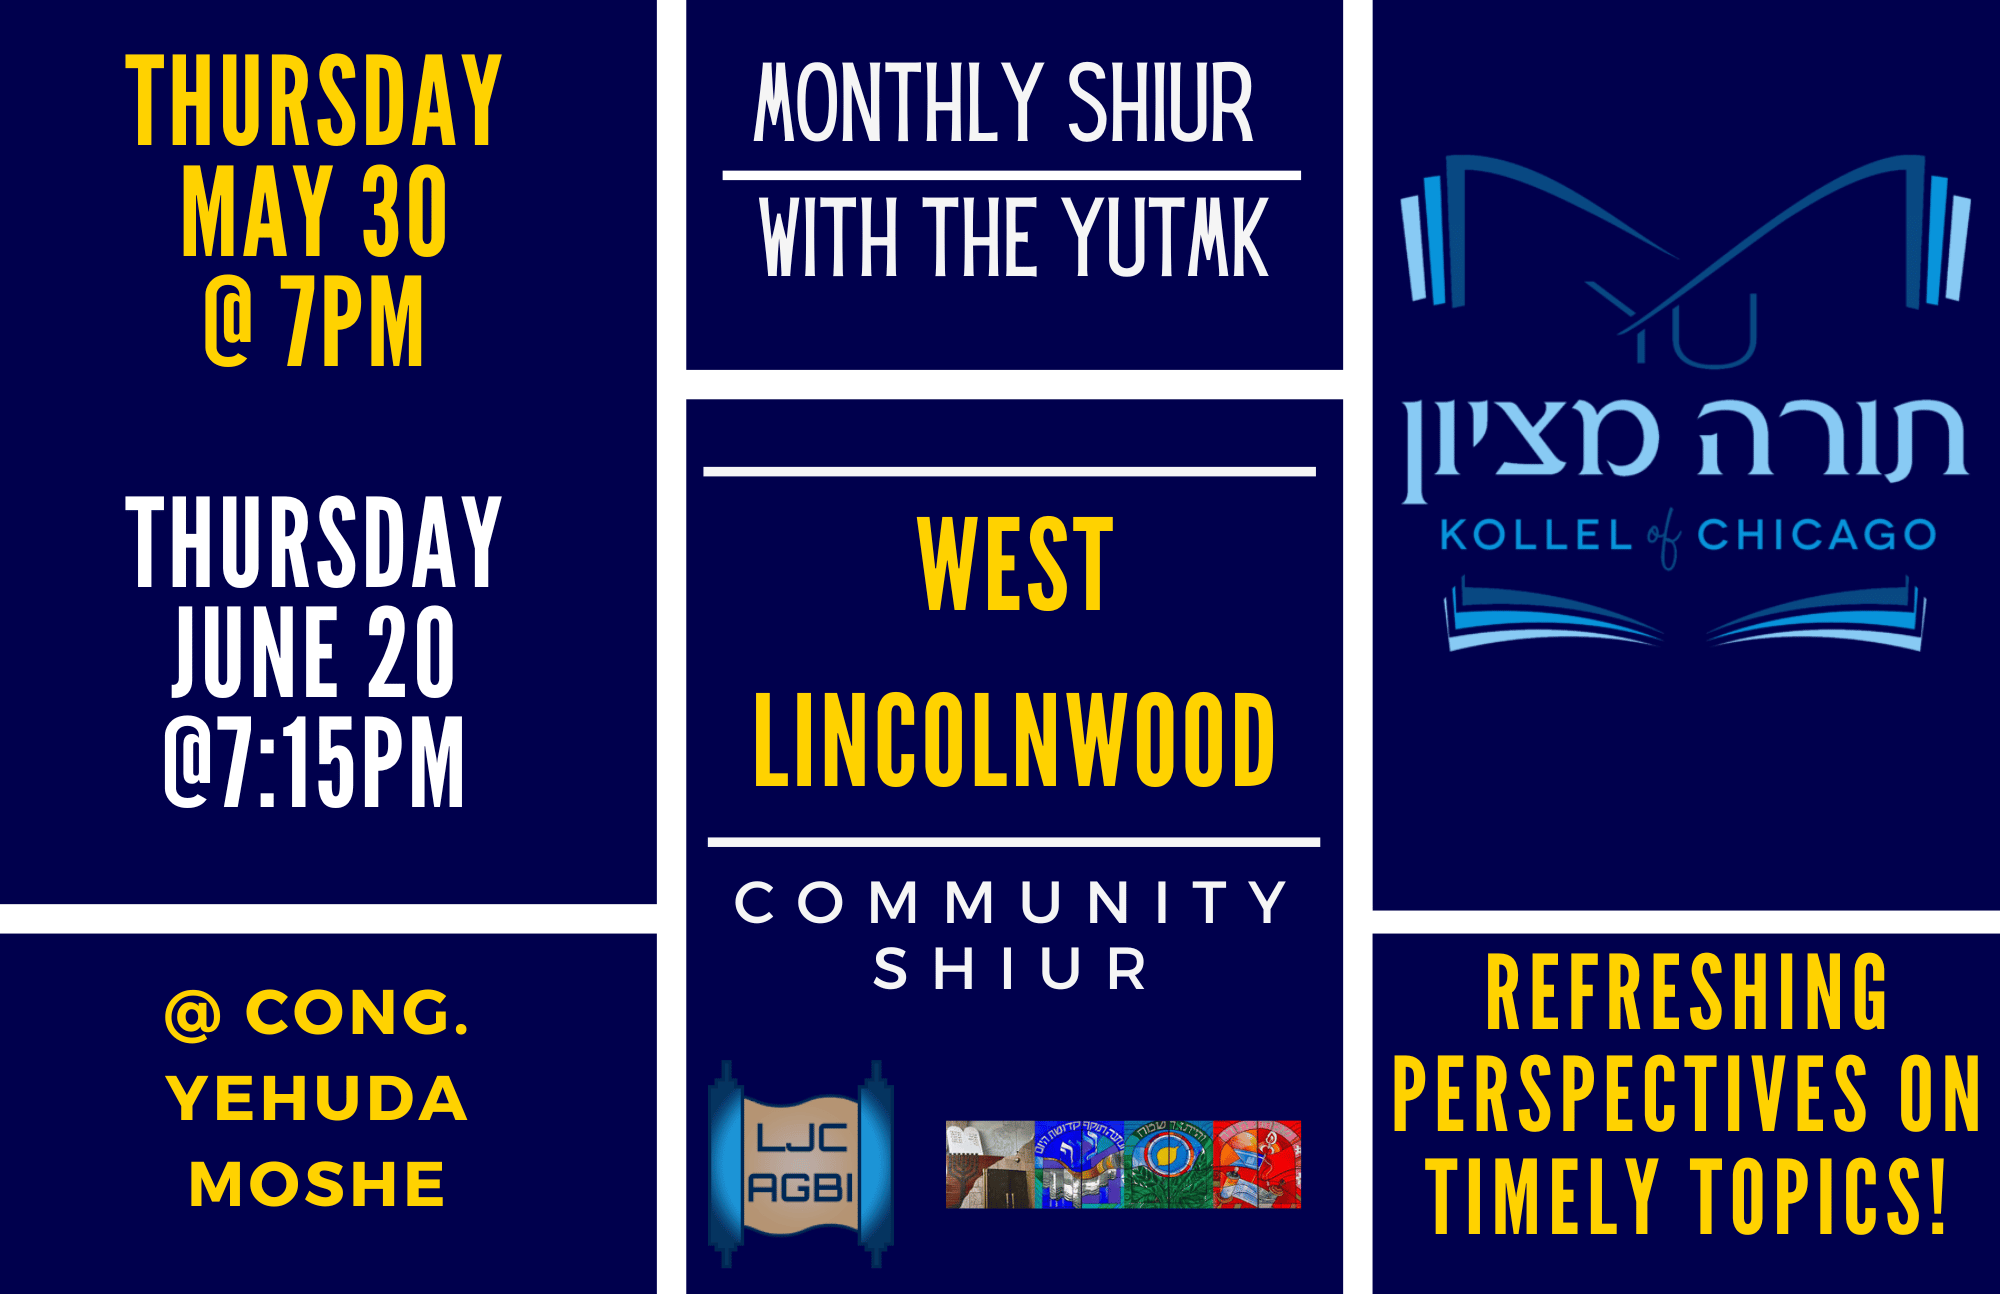 Monthly Shiur with YUTMK